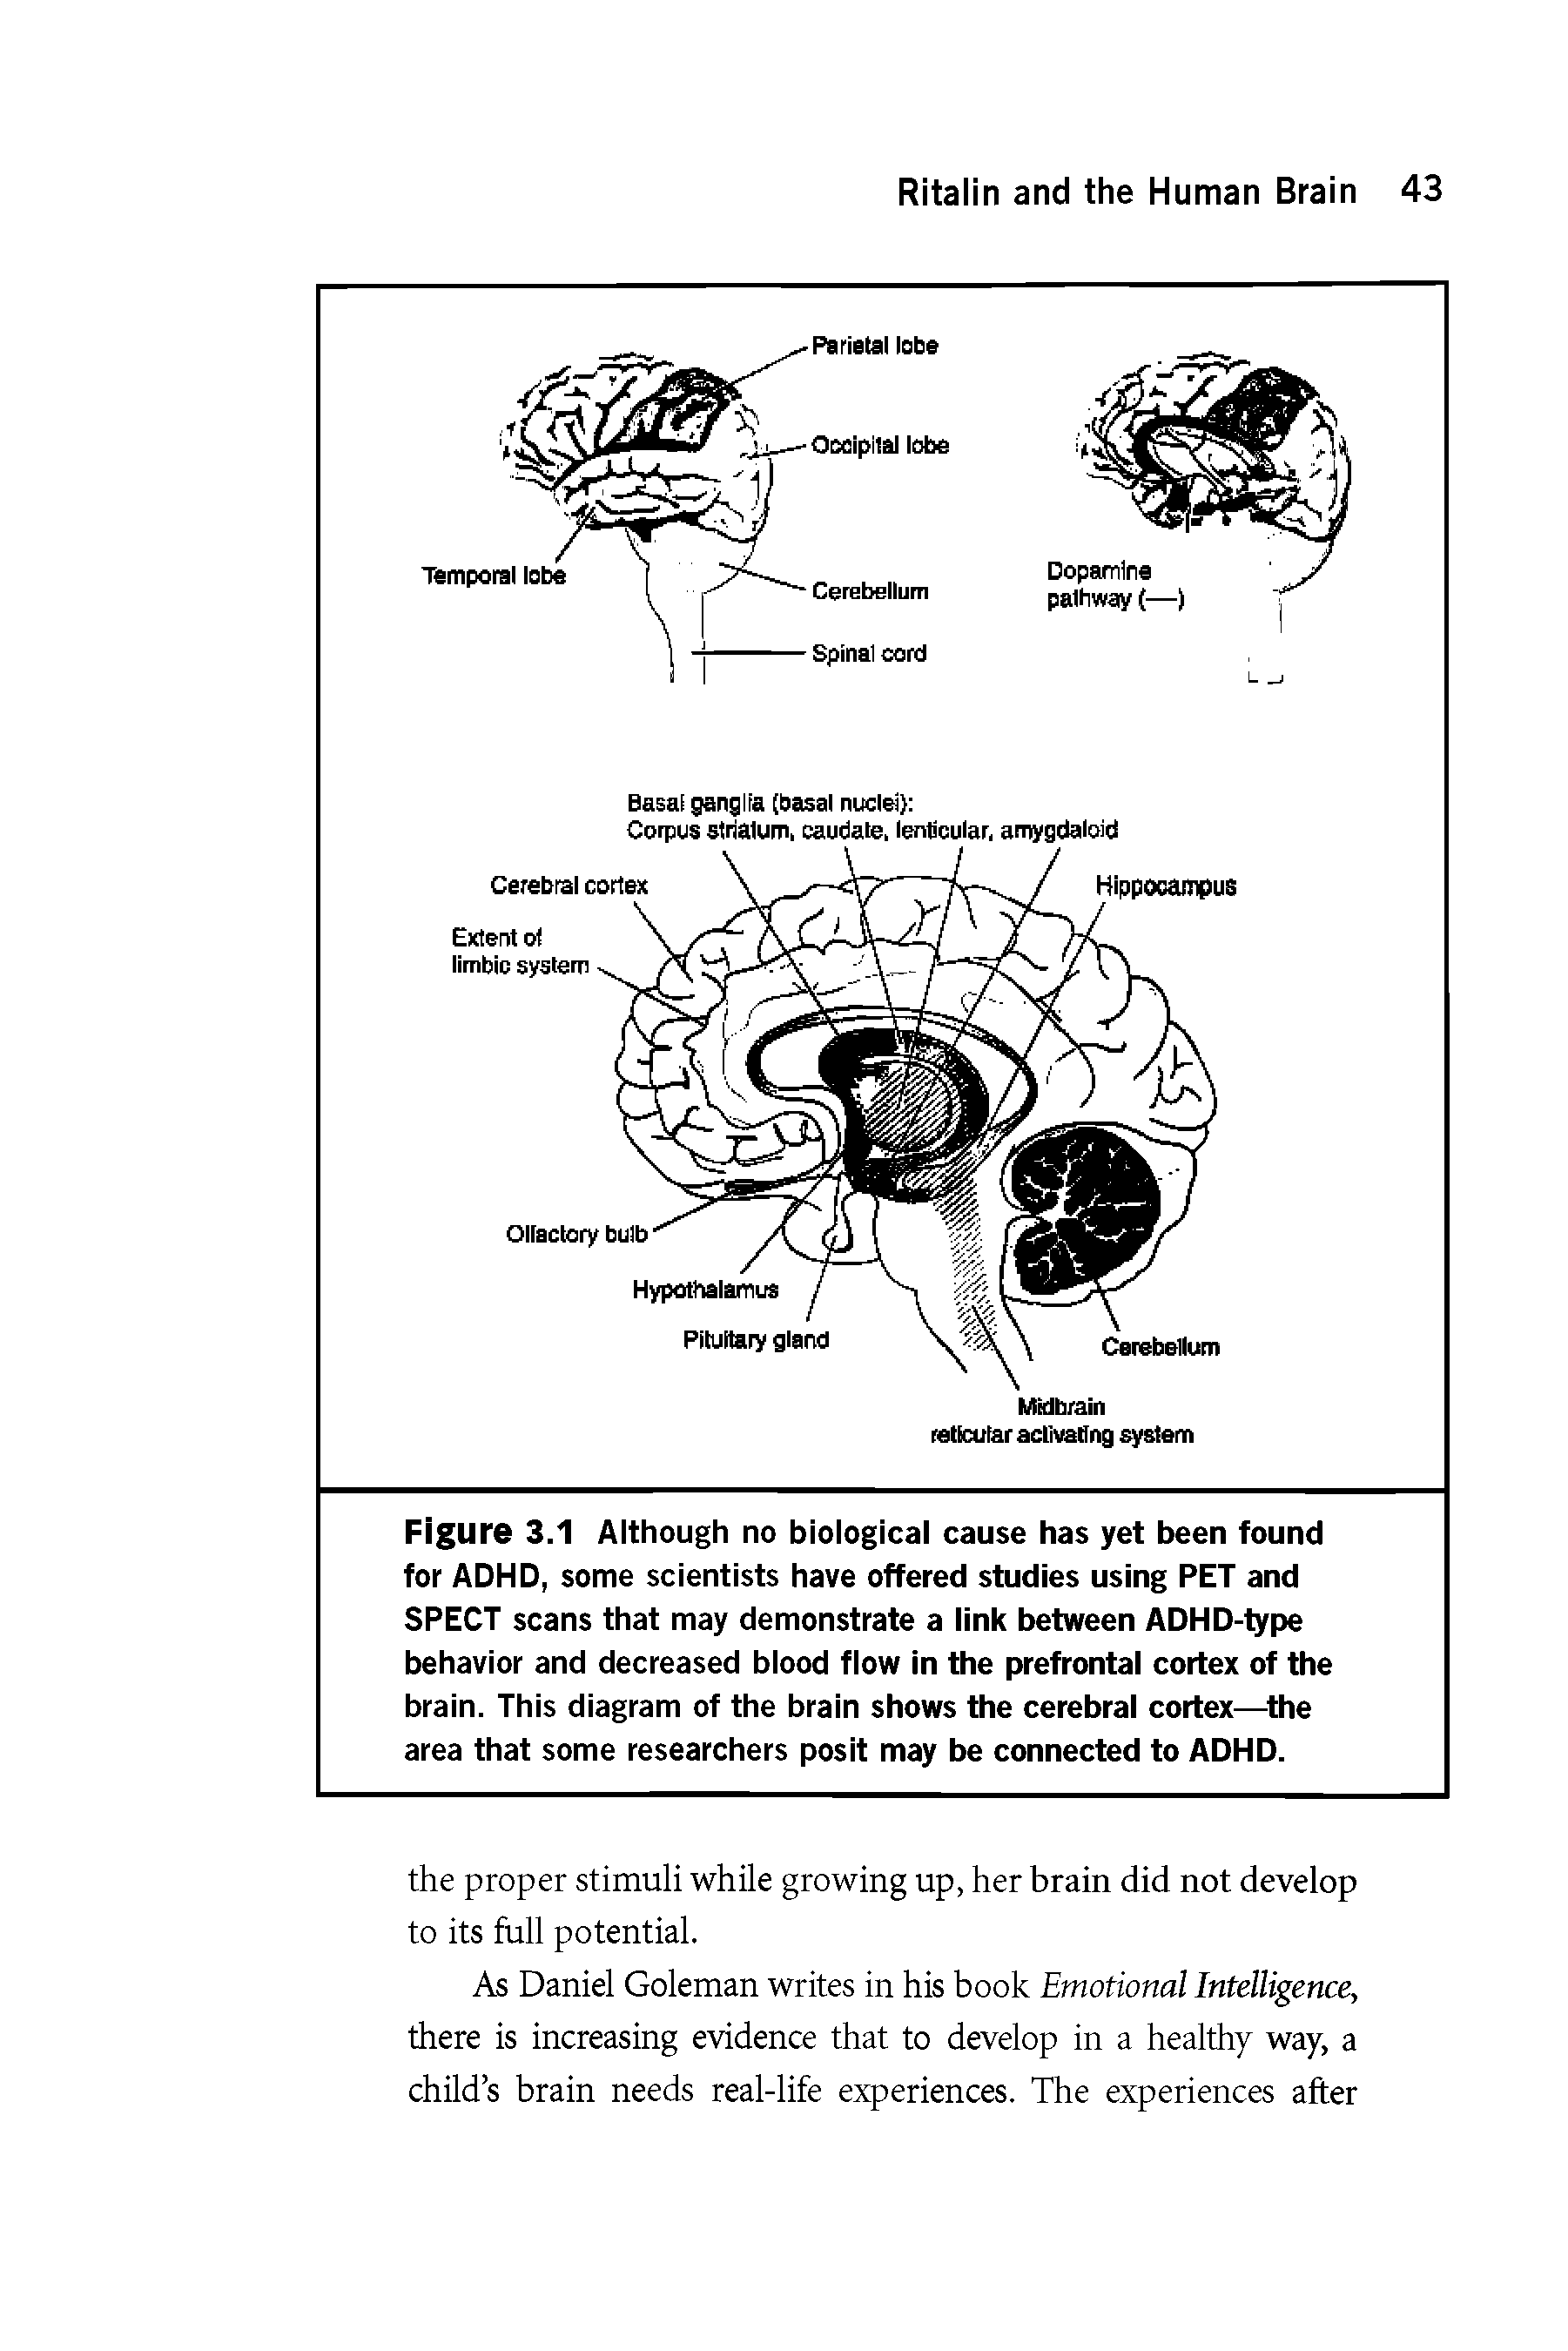 Figure 3.1 Although no biological cause has yet been found for ADHD, some scientists have offered studies using PET and SPECT scans that may demonstrate a link between ADHD-type behavior and decreased blood flow in the prefrontal cortex of the brain. This diagram of the brain shows the cerebral cortex—the area that some researchers posit may be connected to ADHD.